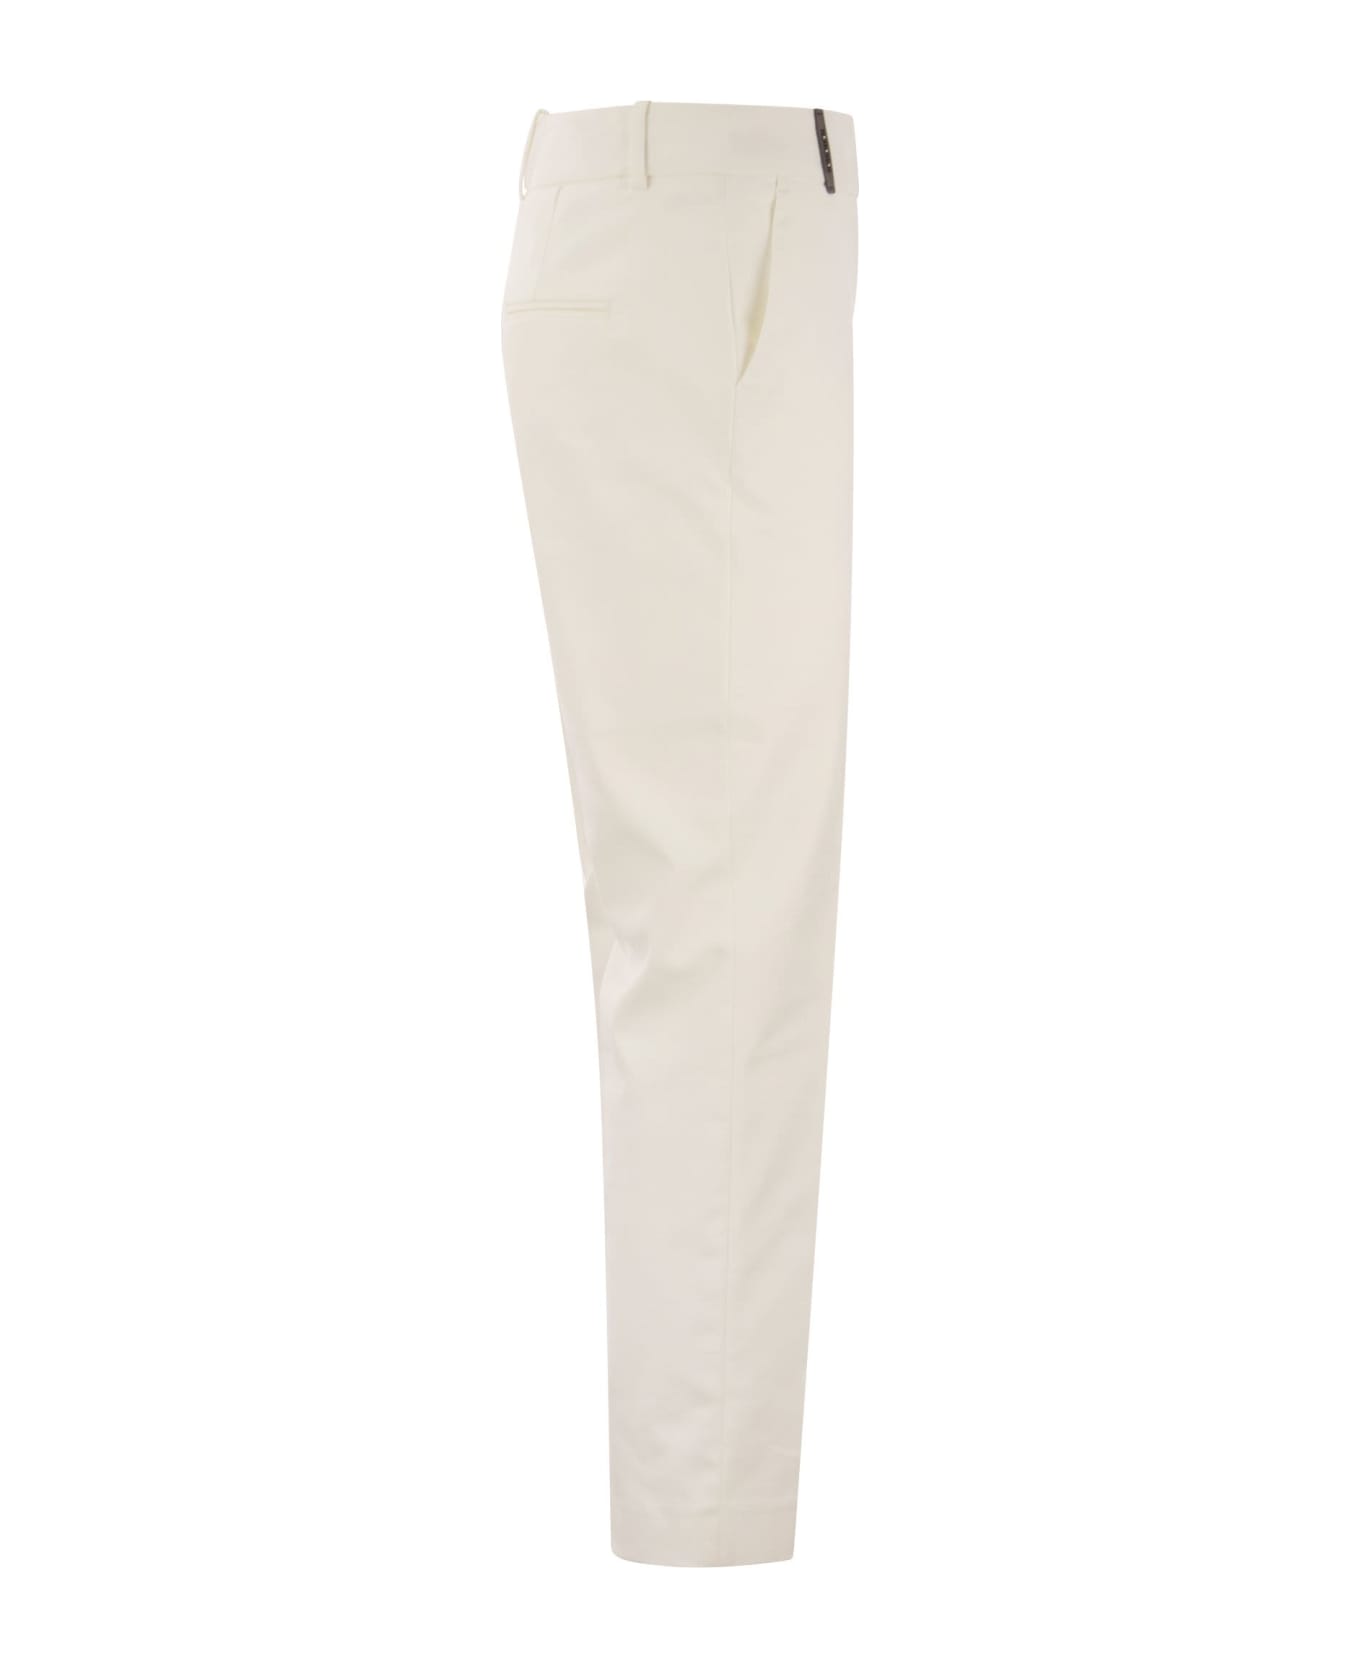 Peserico Iconic Fit Trousers In Comfort Cotton Satin - White ボトムス